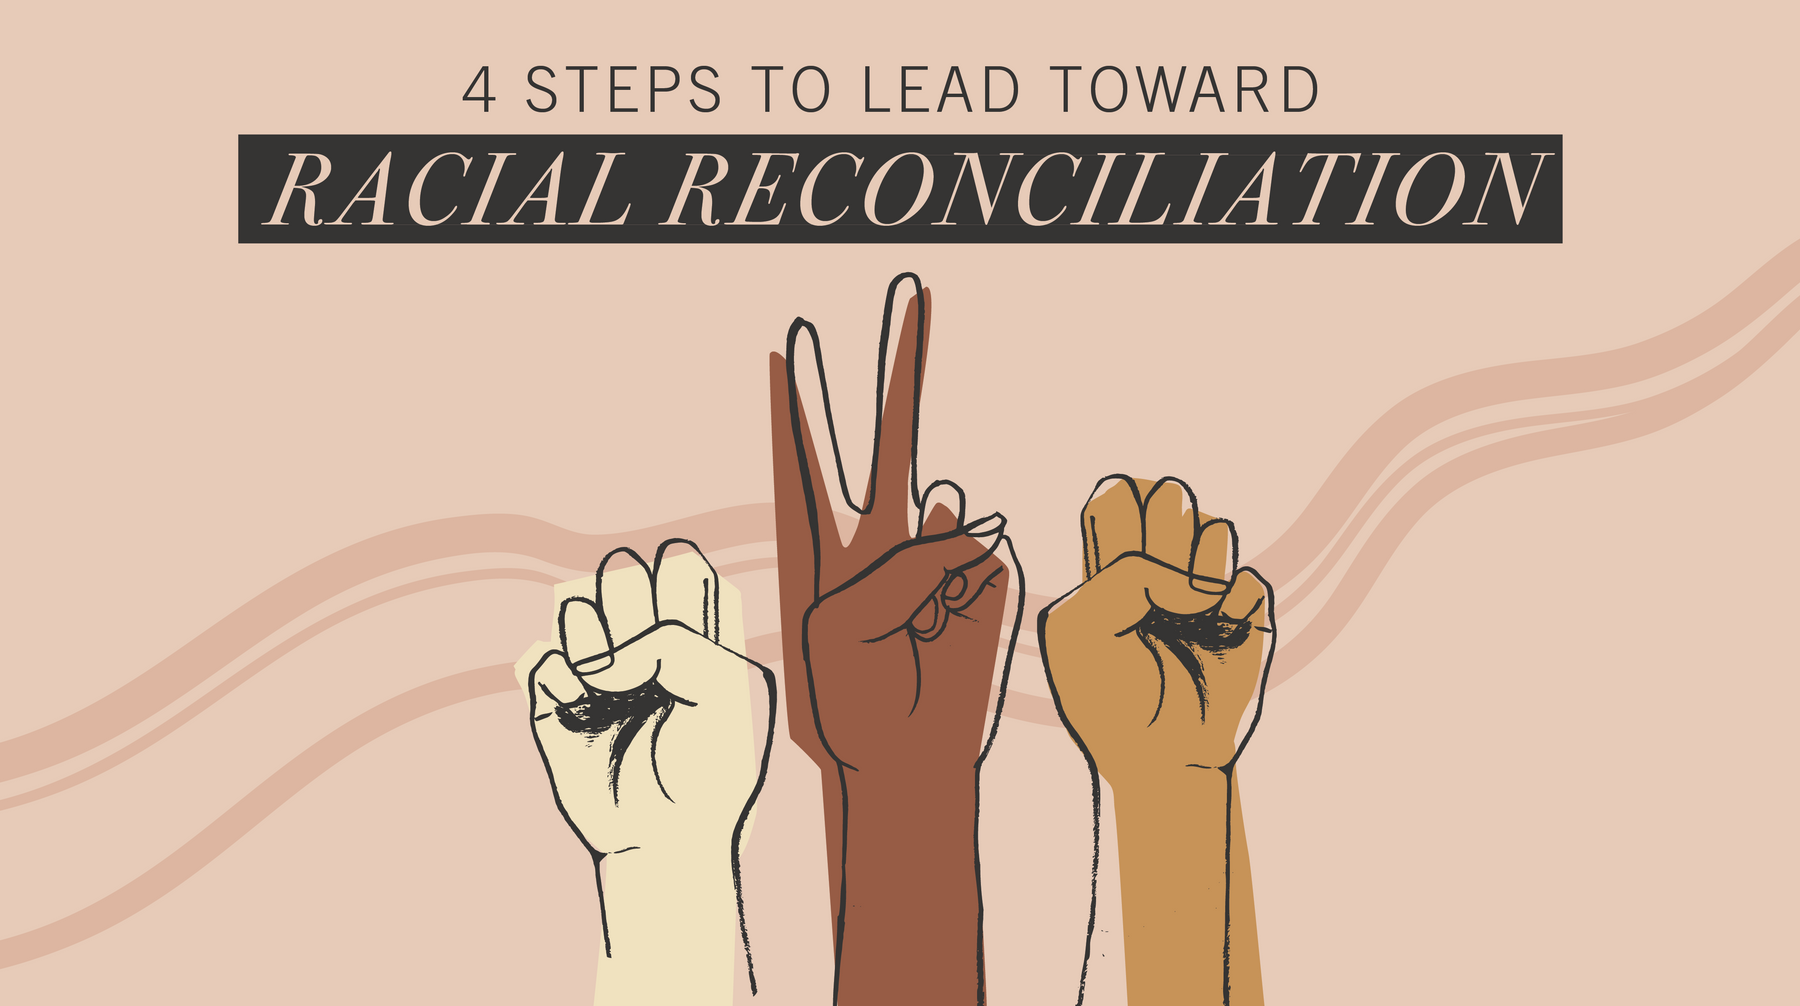 4 Steps To Lead Toward Racial Reconciliation